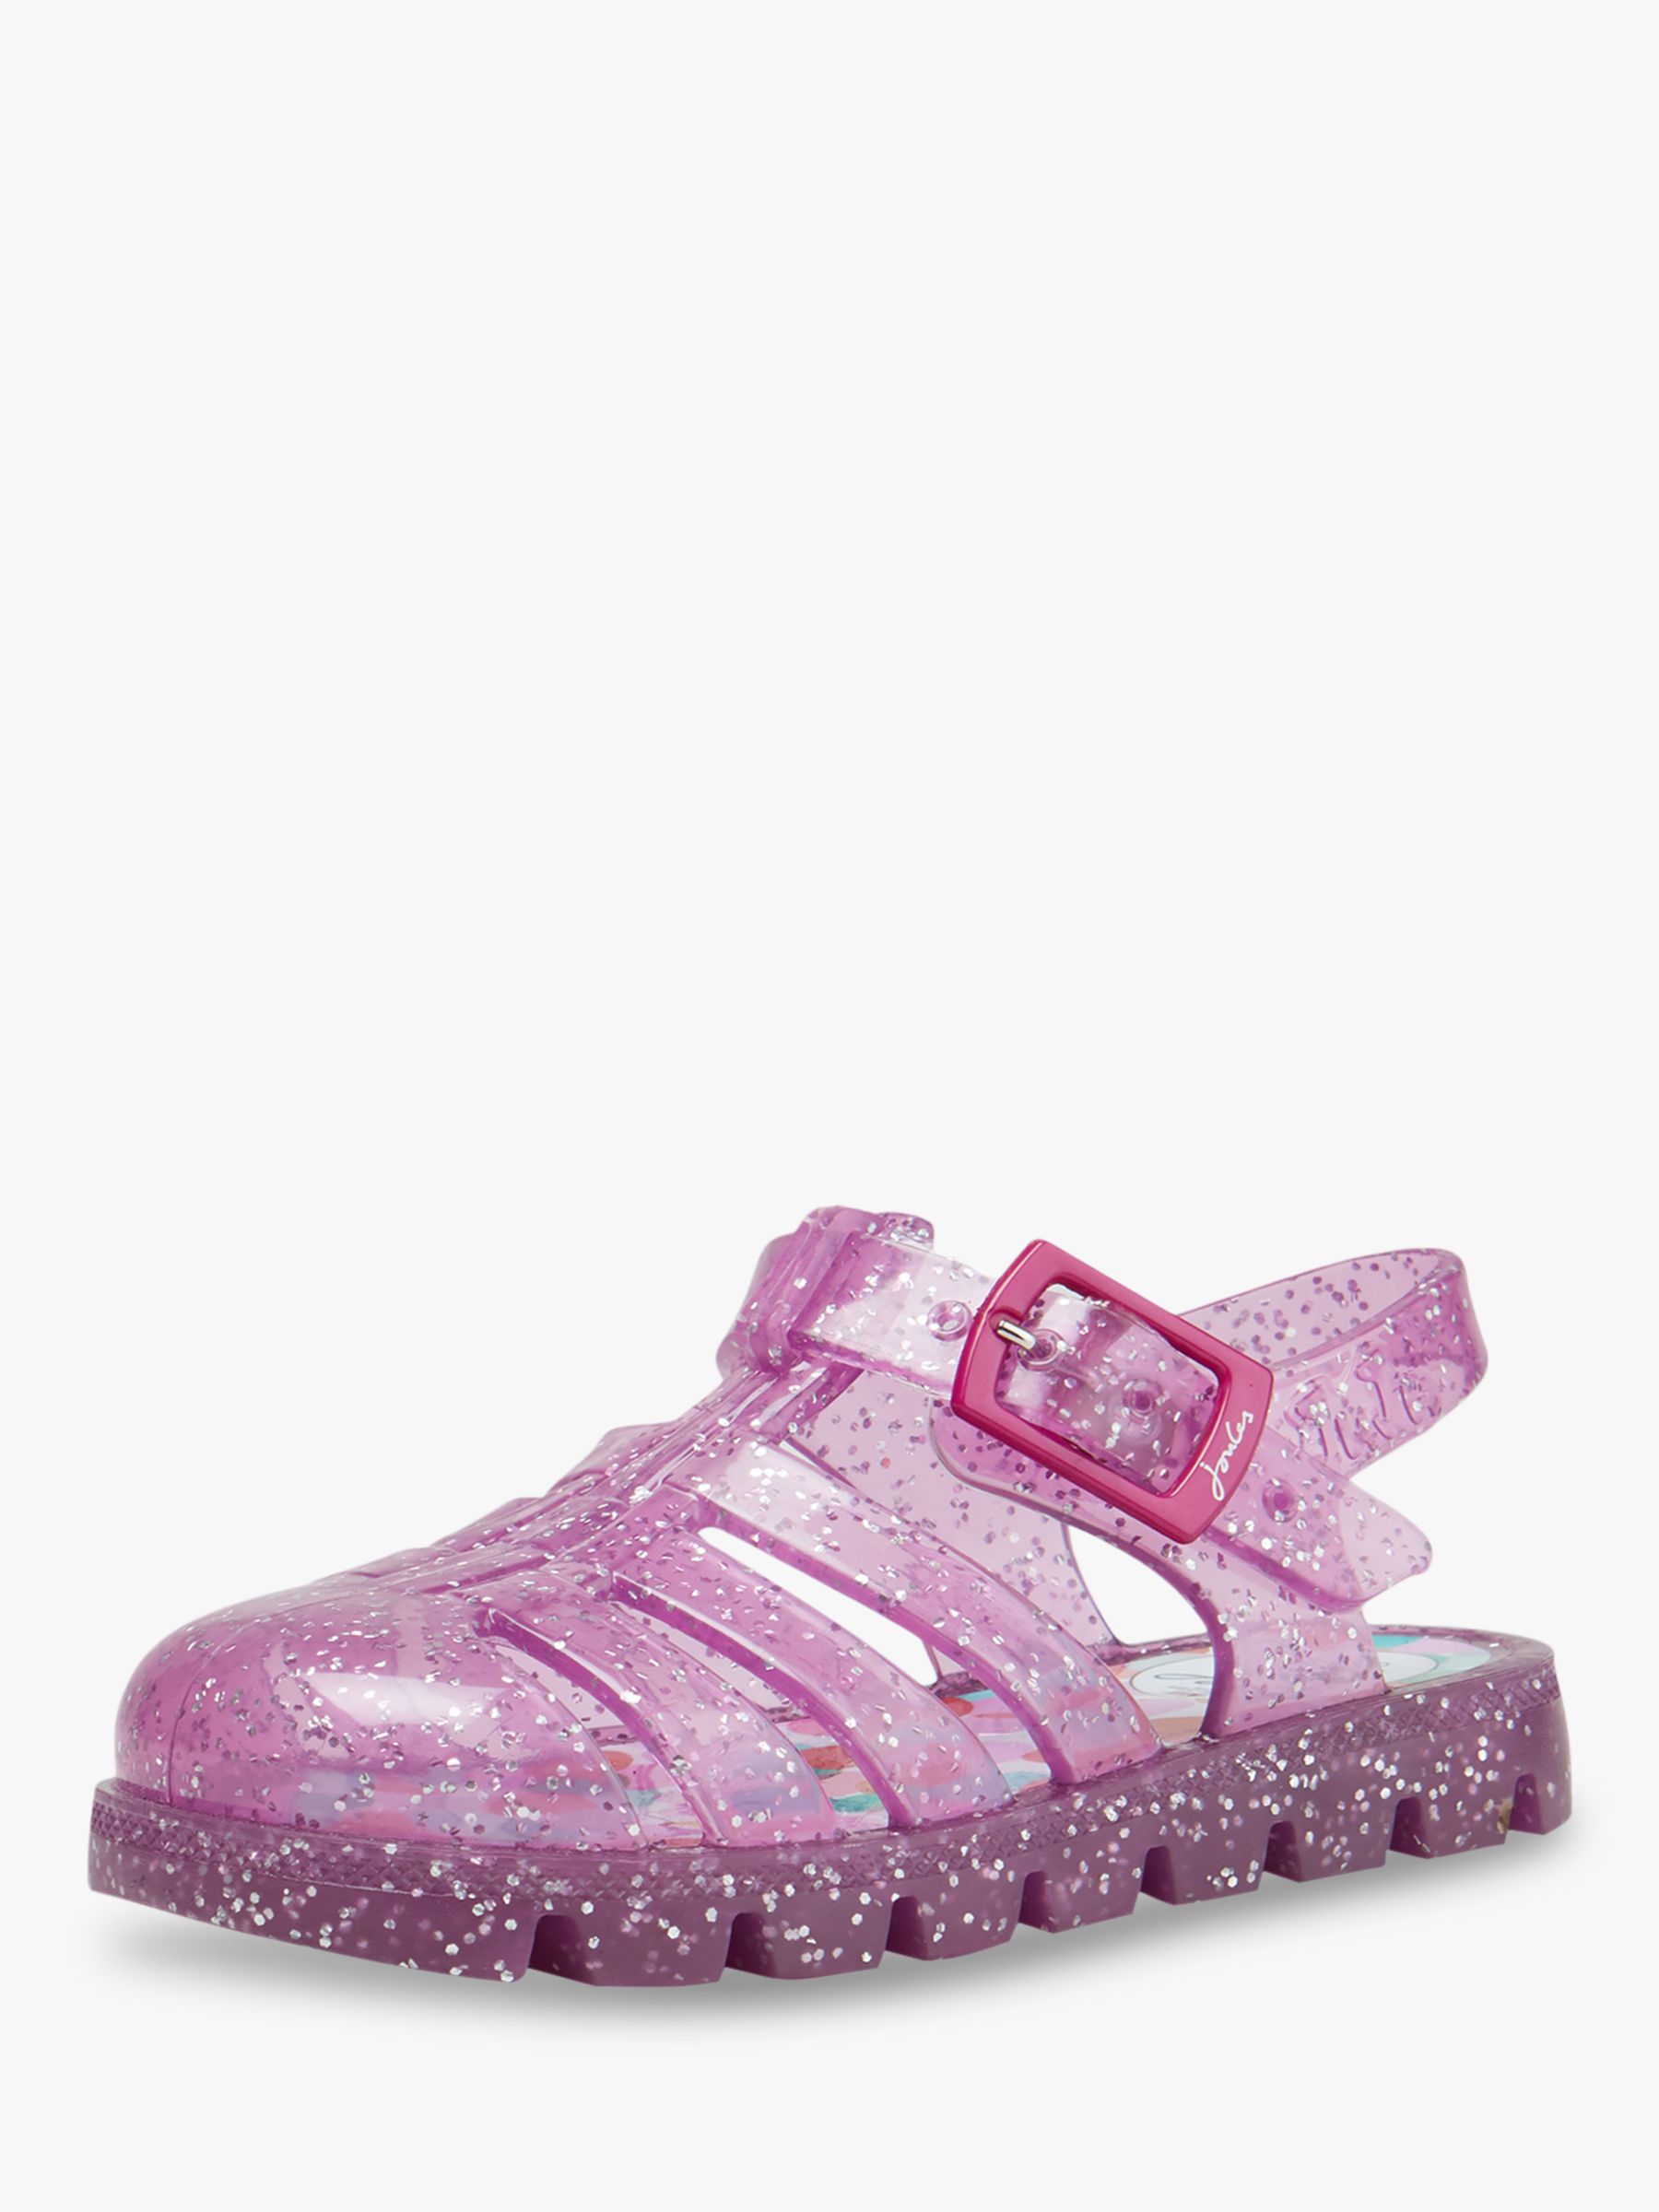 john lewis jelly shoes